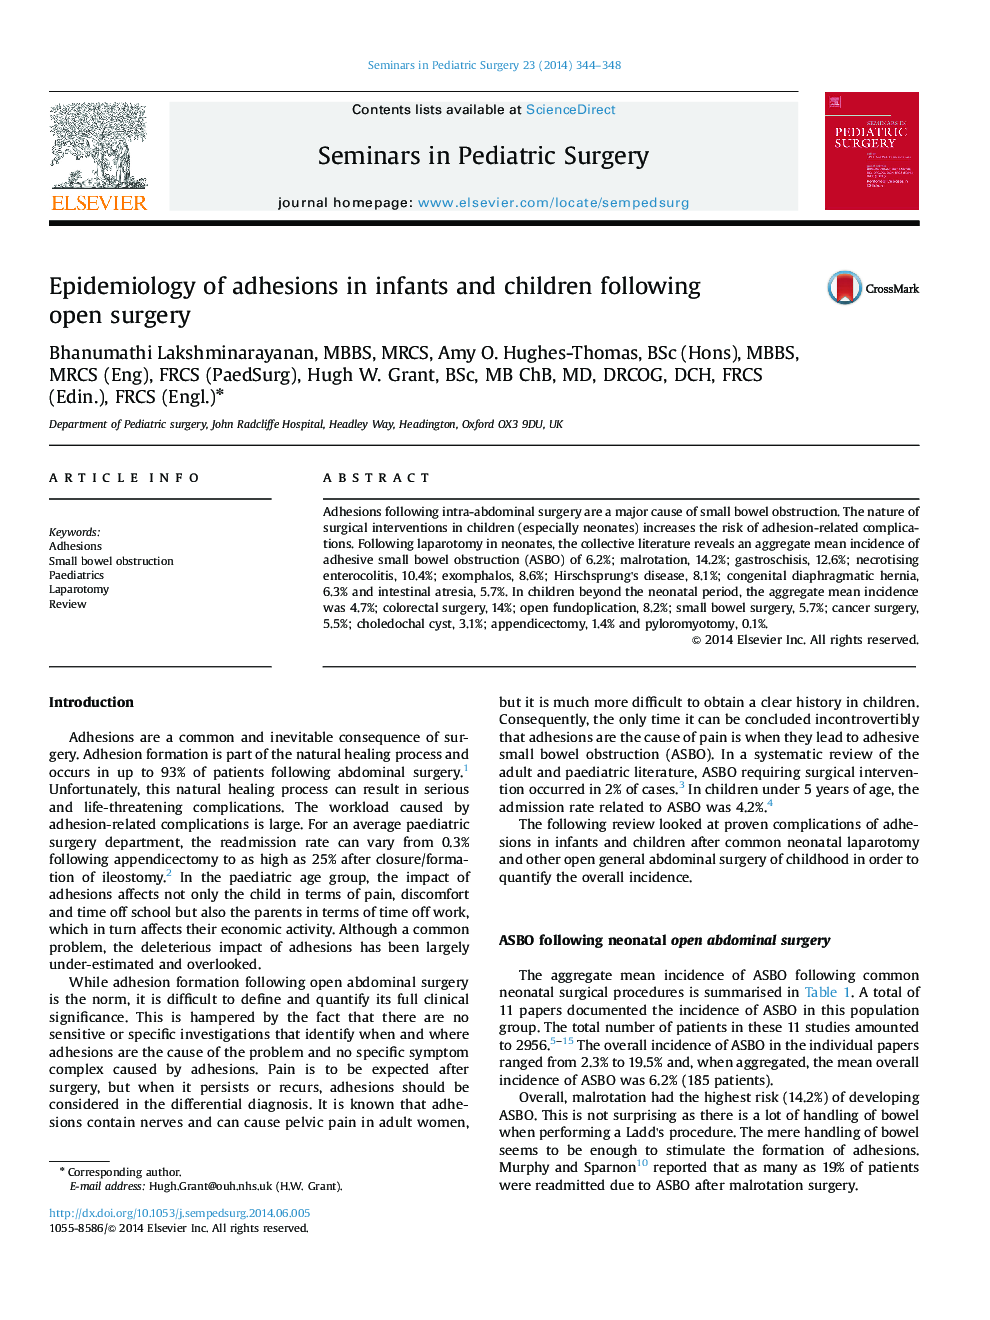 Epidemiology of adhesions in infants and children following open surgery